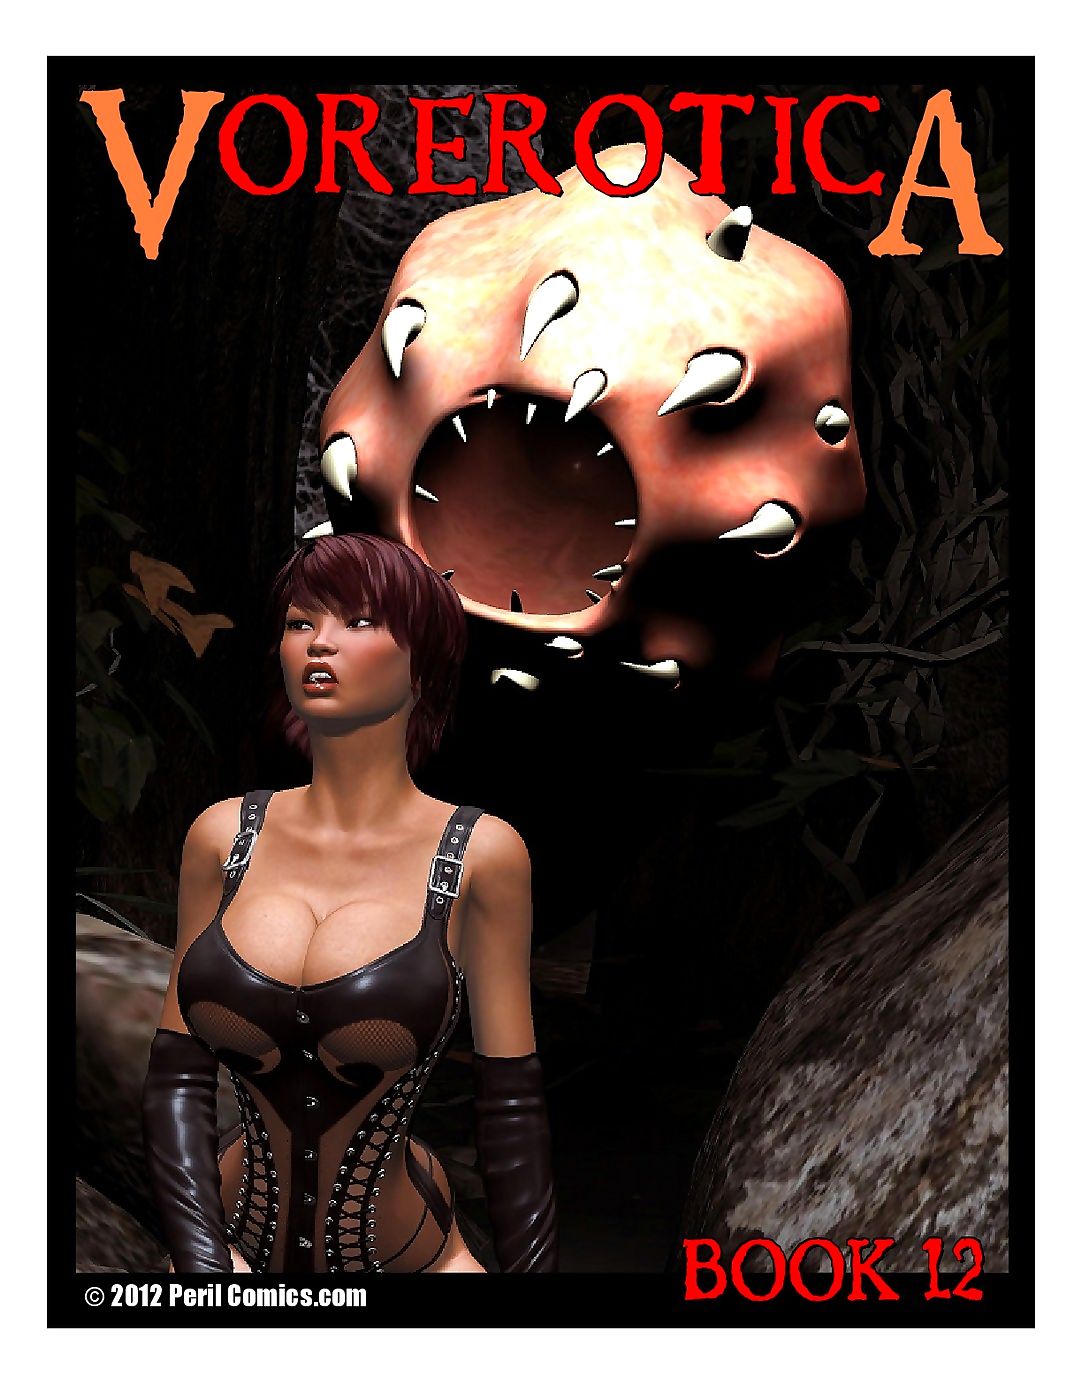 VoreroticA: Tales of Consent – Book 12 page 1